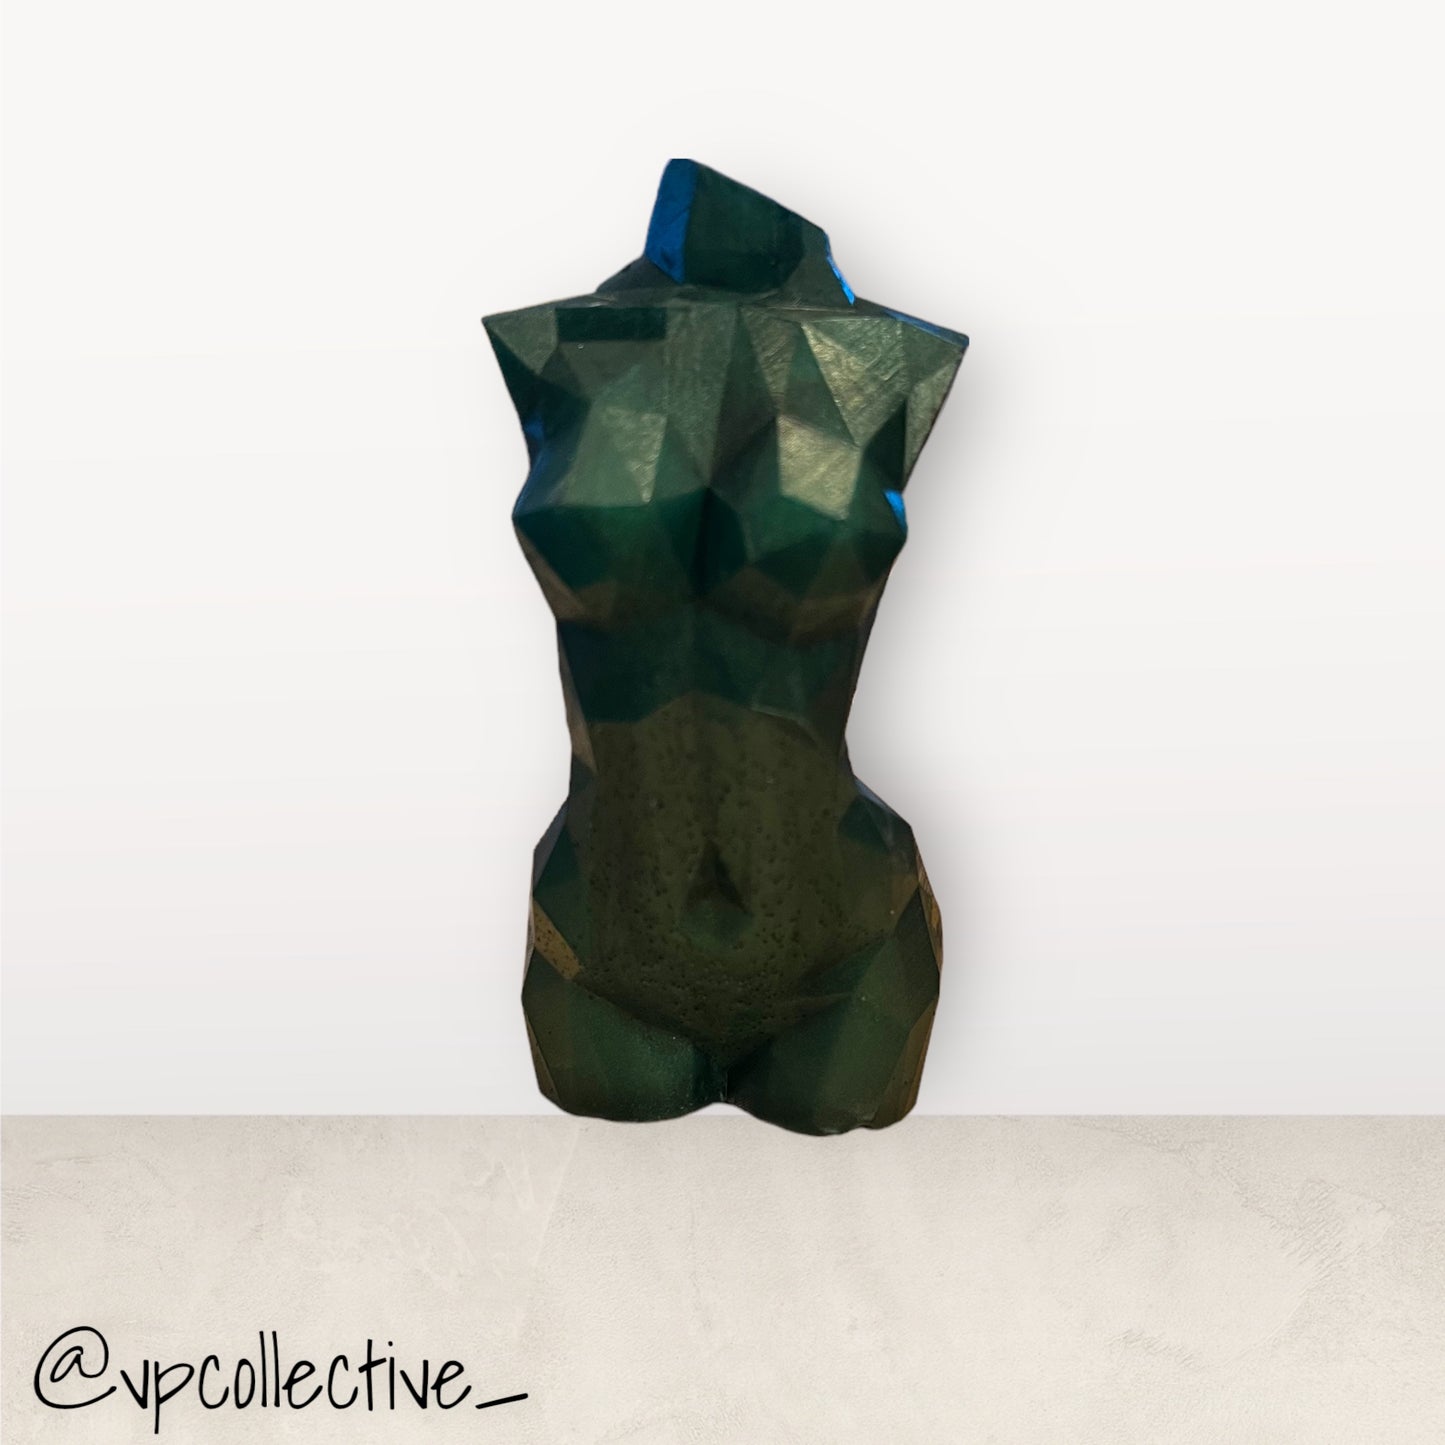 Exquisite Emerald Faceted Goddess Bust